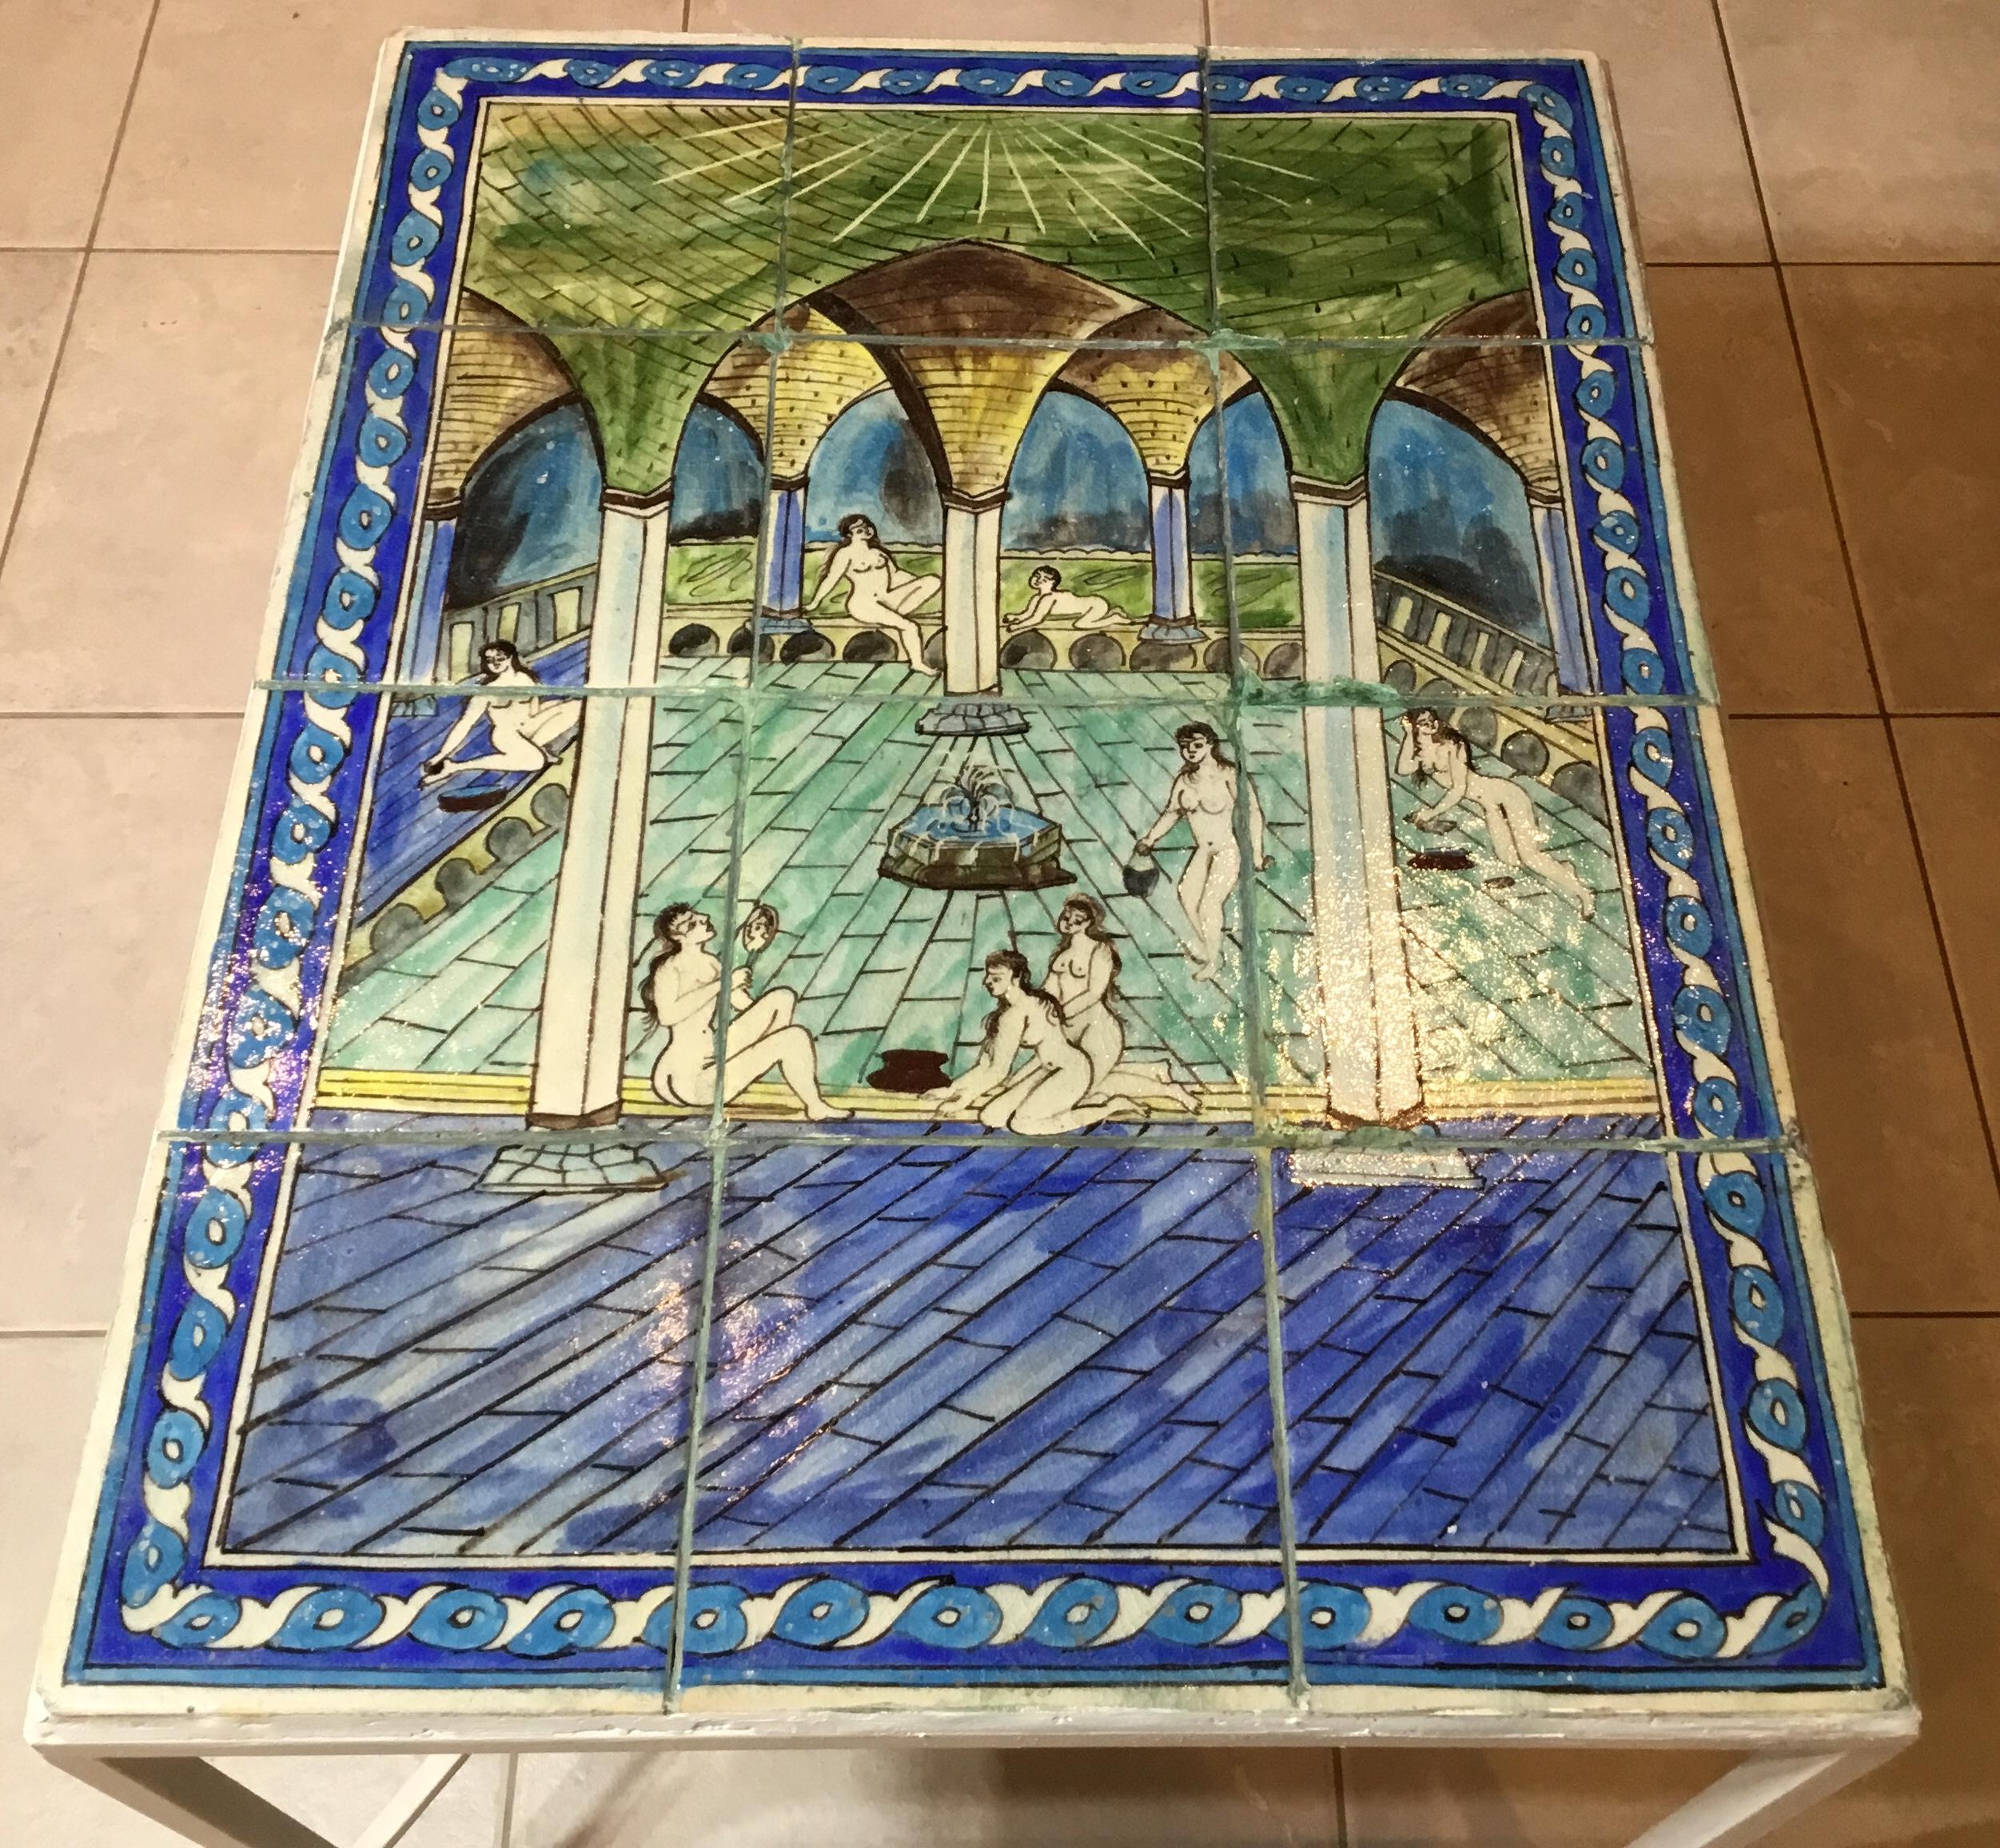 Exceptional coffee table made of set of six vintage ceramic tile hand painted and glazed, of nude woman in pool palace scenery, decorative architectural ceiling structure with columns, water fountains, and turquoise color pool. Solid steel base and